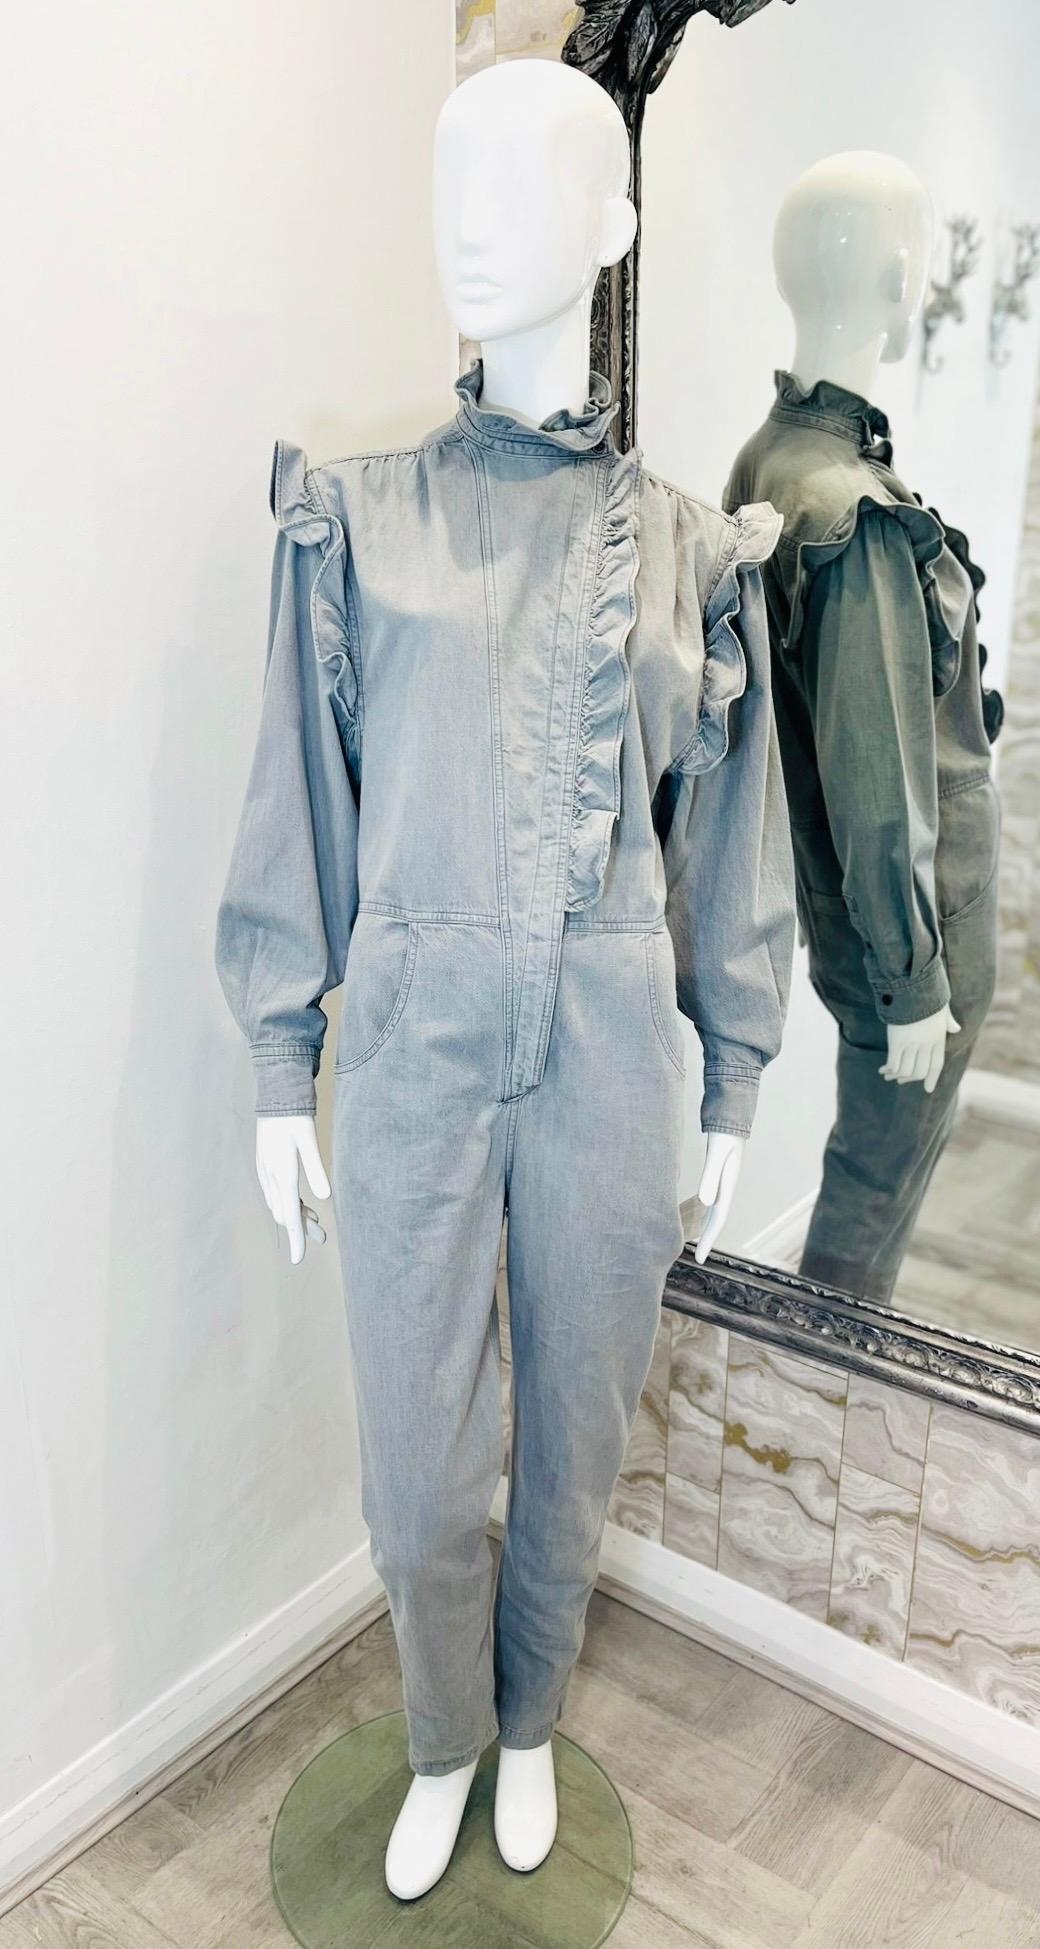 Isabel Marant Etoile Ruffled Cotton Jumpsuit

Grey 'Gayle' jumpsuit designed with ruffle detailing to the high-neck, shoulders and asymmetric front placket.

Styled with balloon sleeves and utility-inspired front and back pockets.

Featuring relaxed